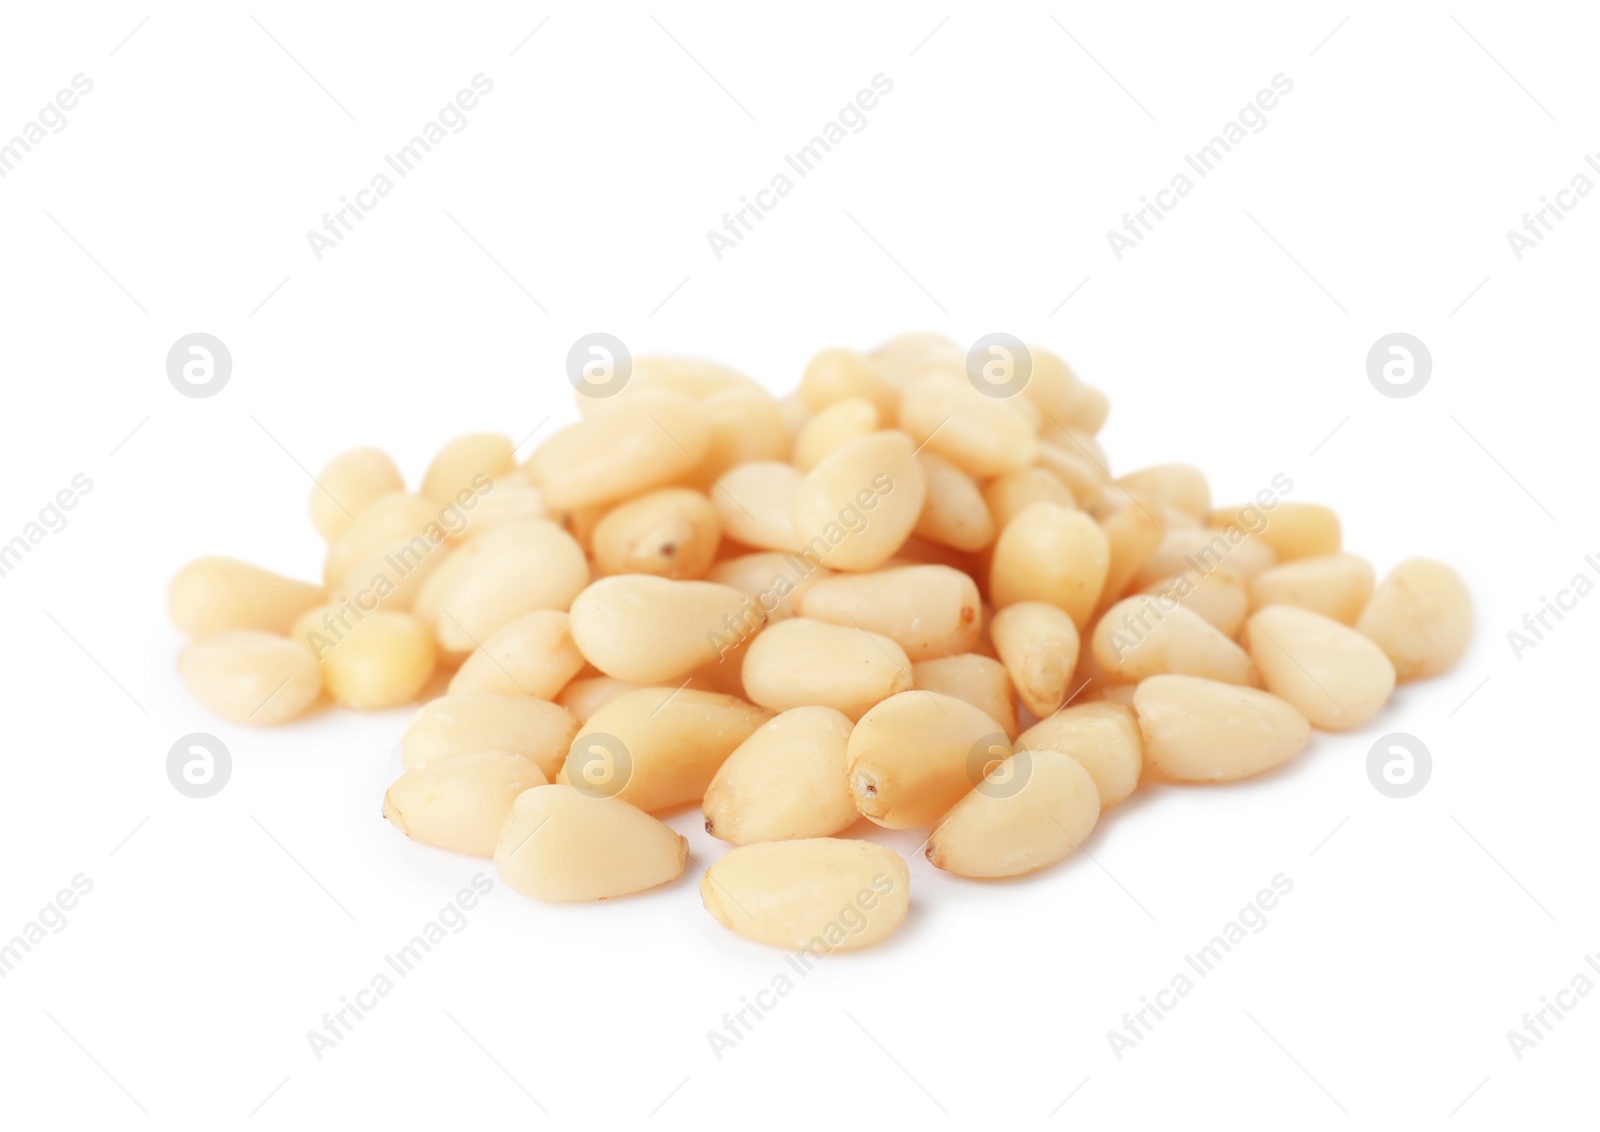 Photo of Heap of pine nuts on white background